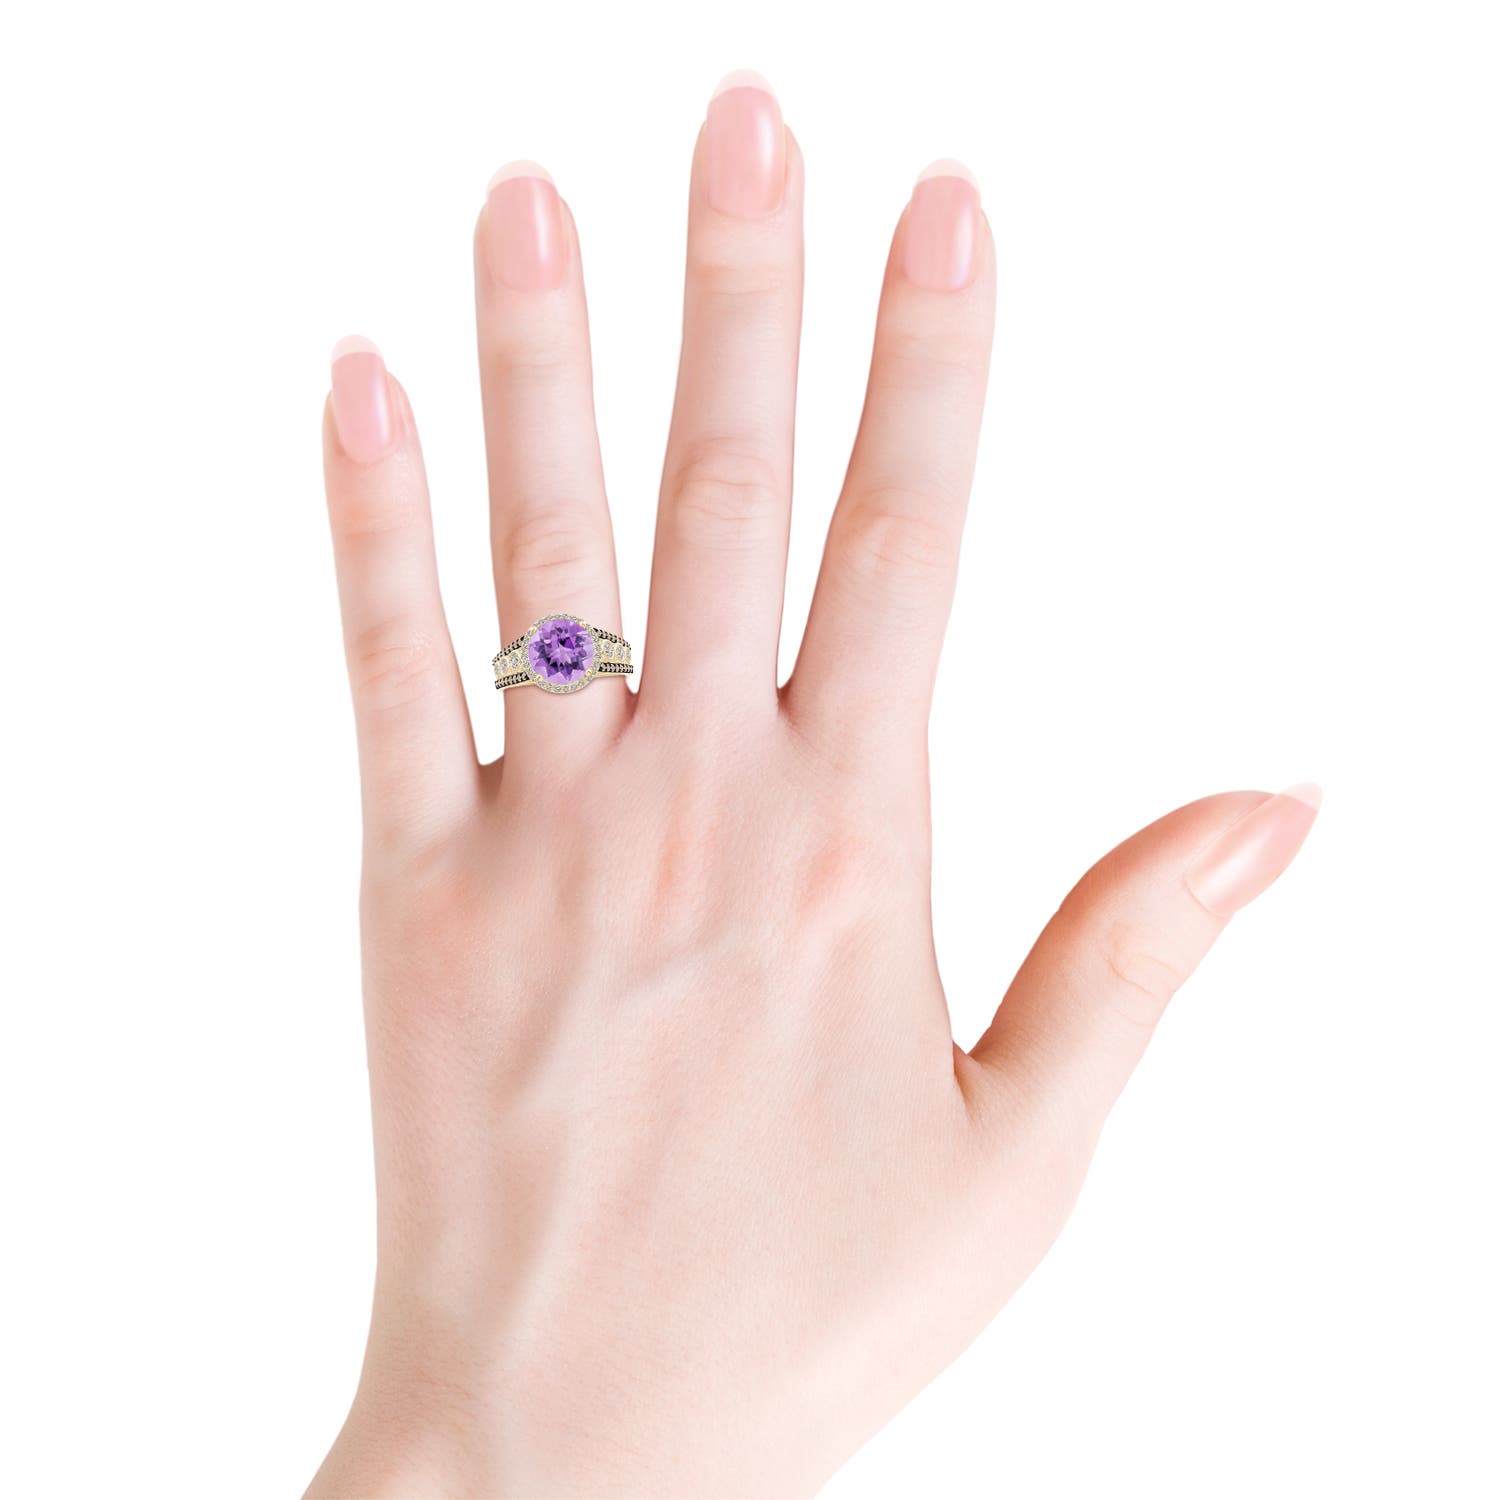 A - Amethyst / 2.64 CT / 14 KT Yellow Gold